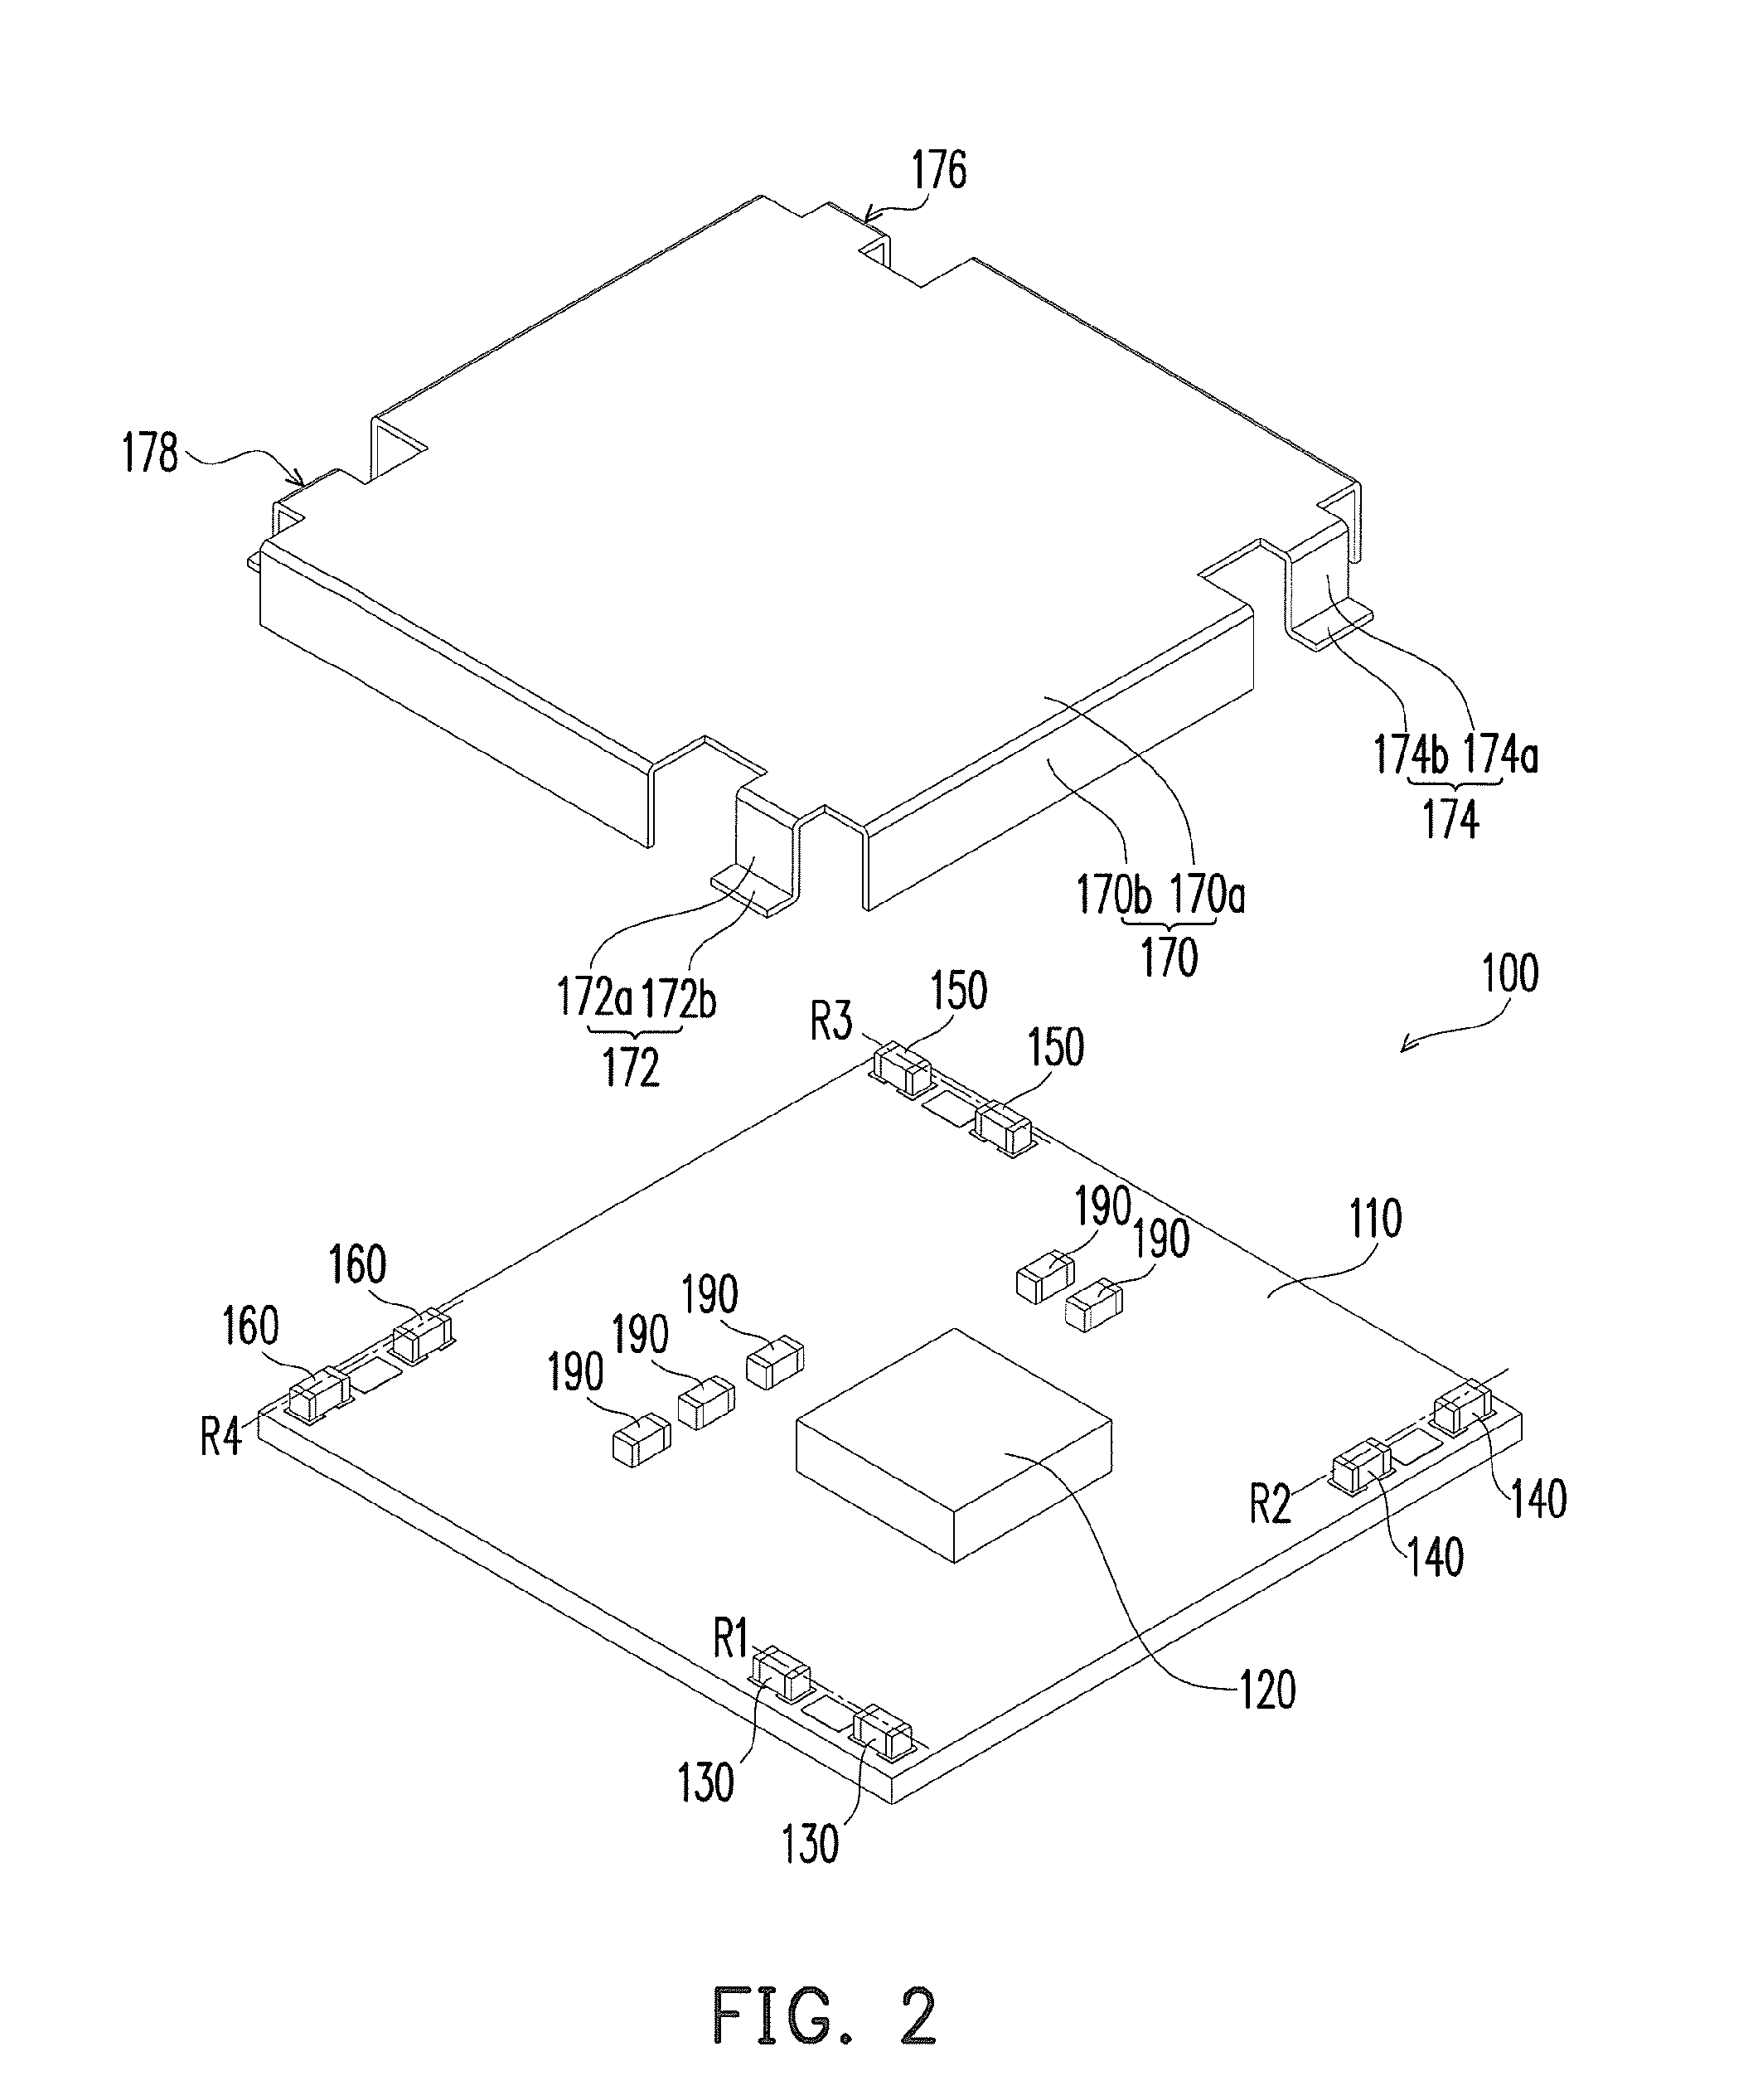 Chip package structure with shielding cover